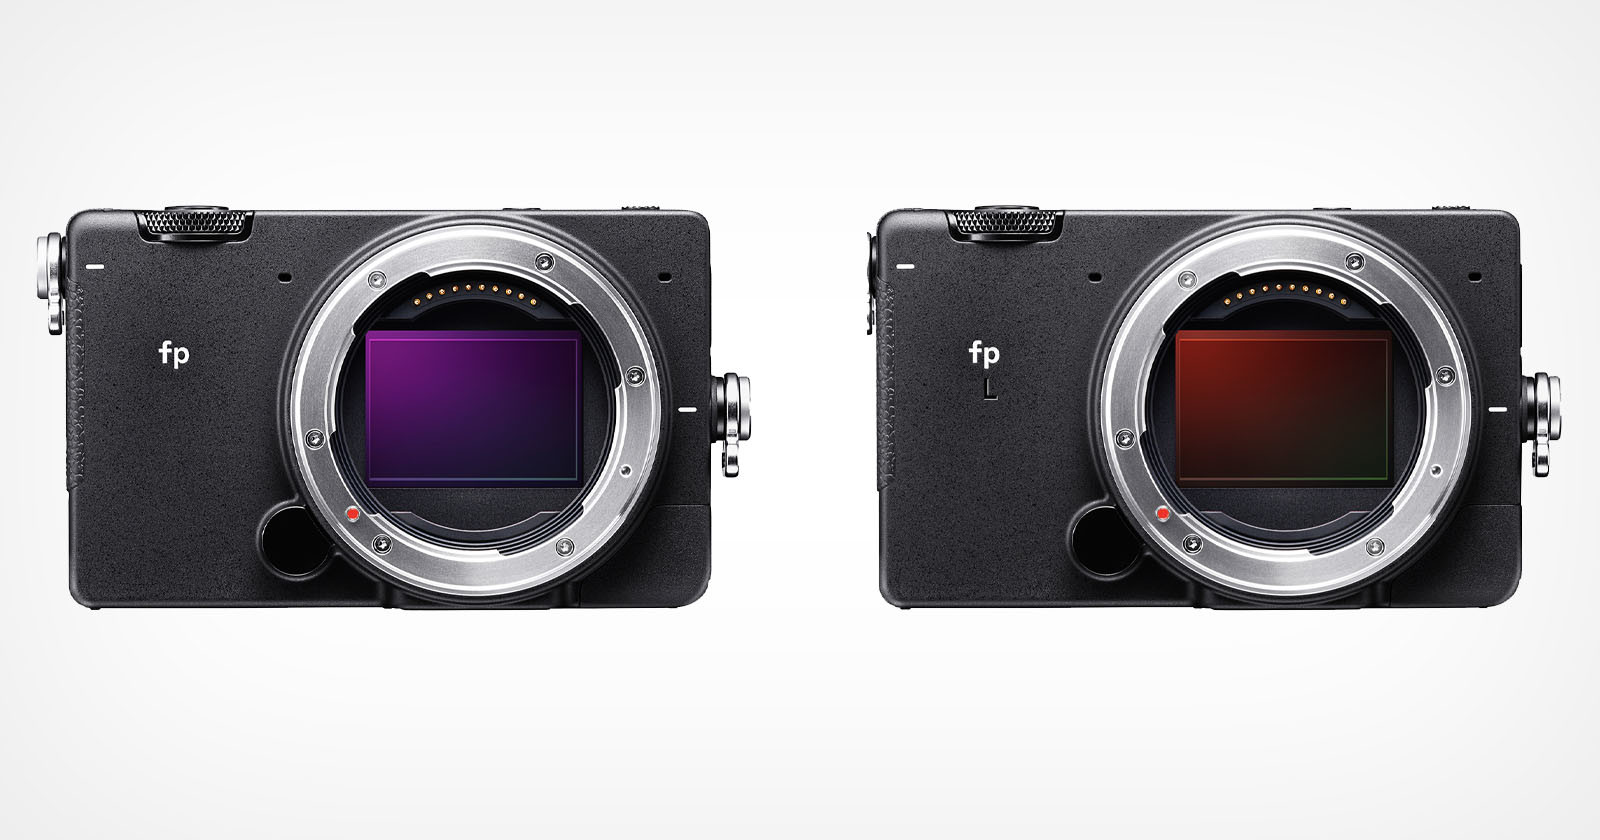  sigma gives cameras multiple video-focused upgrades 